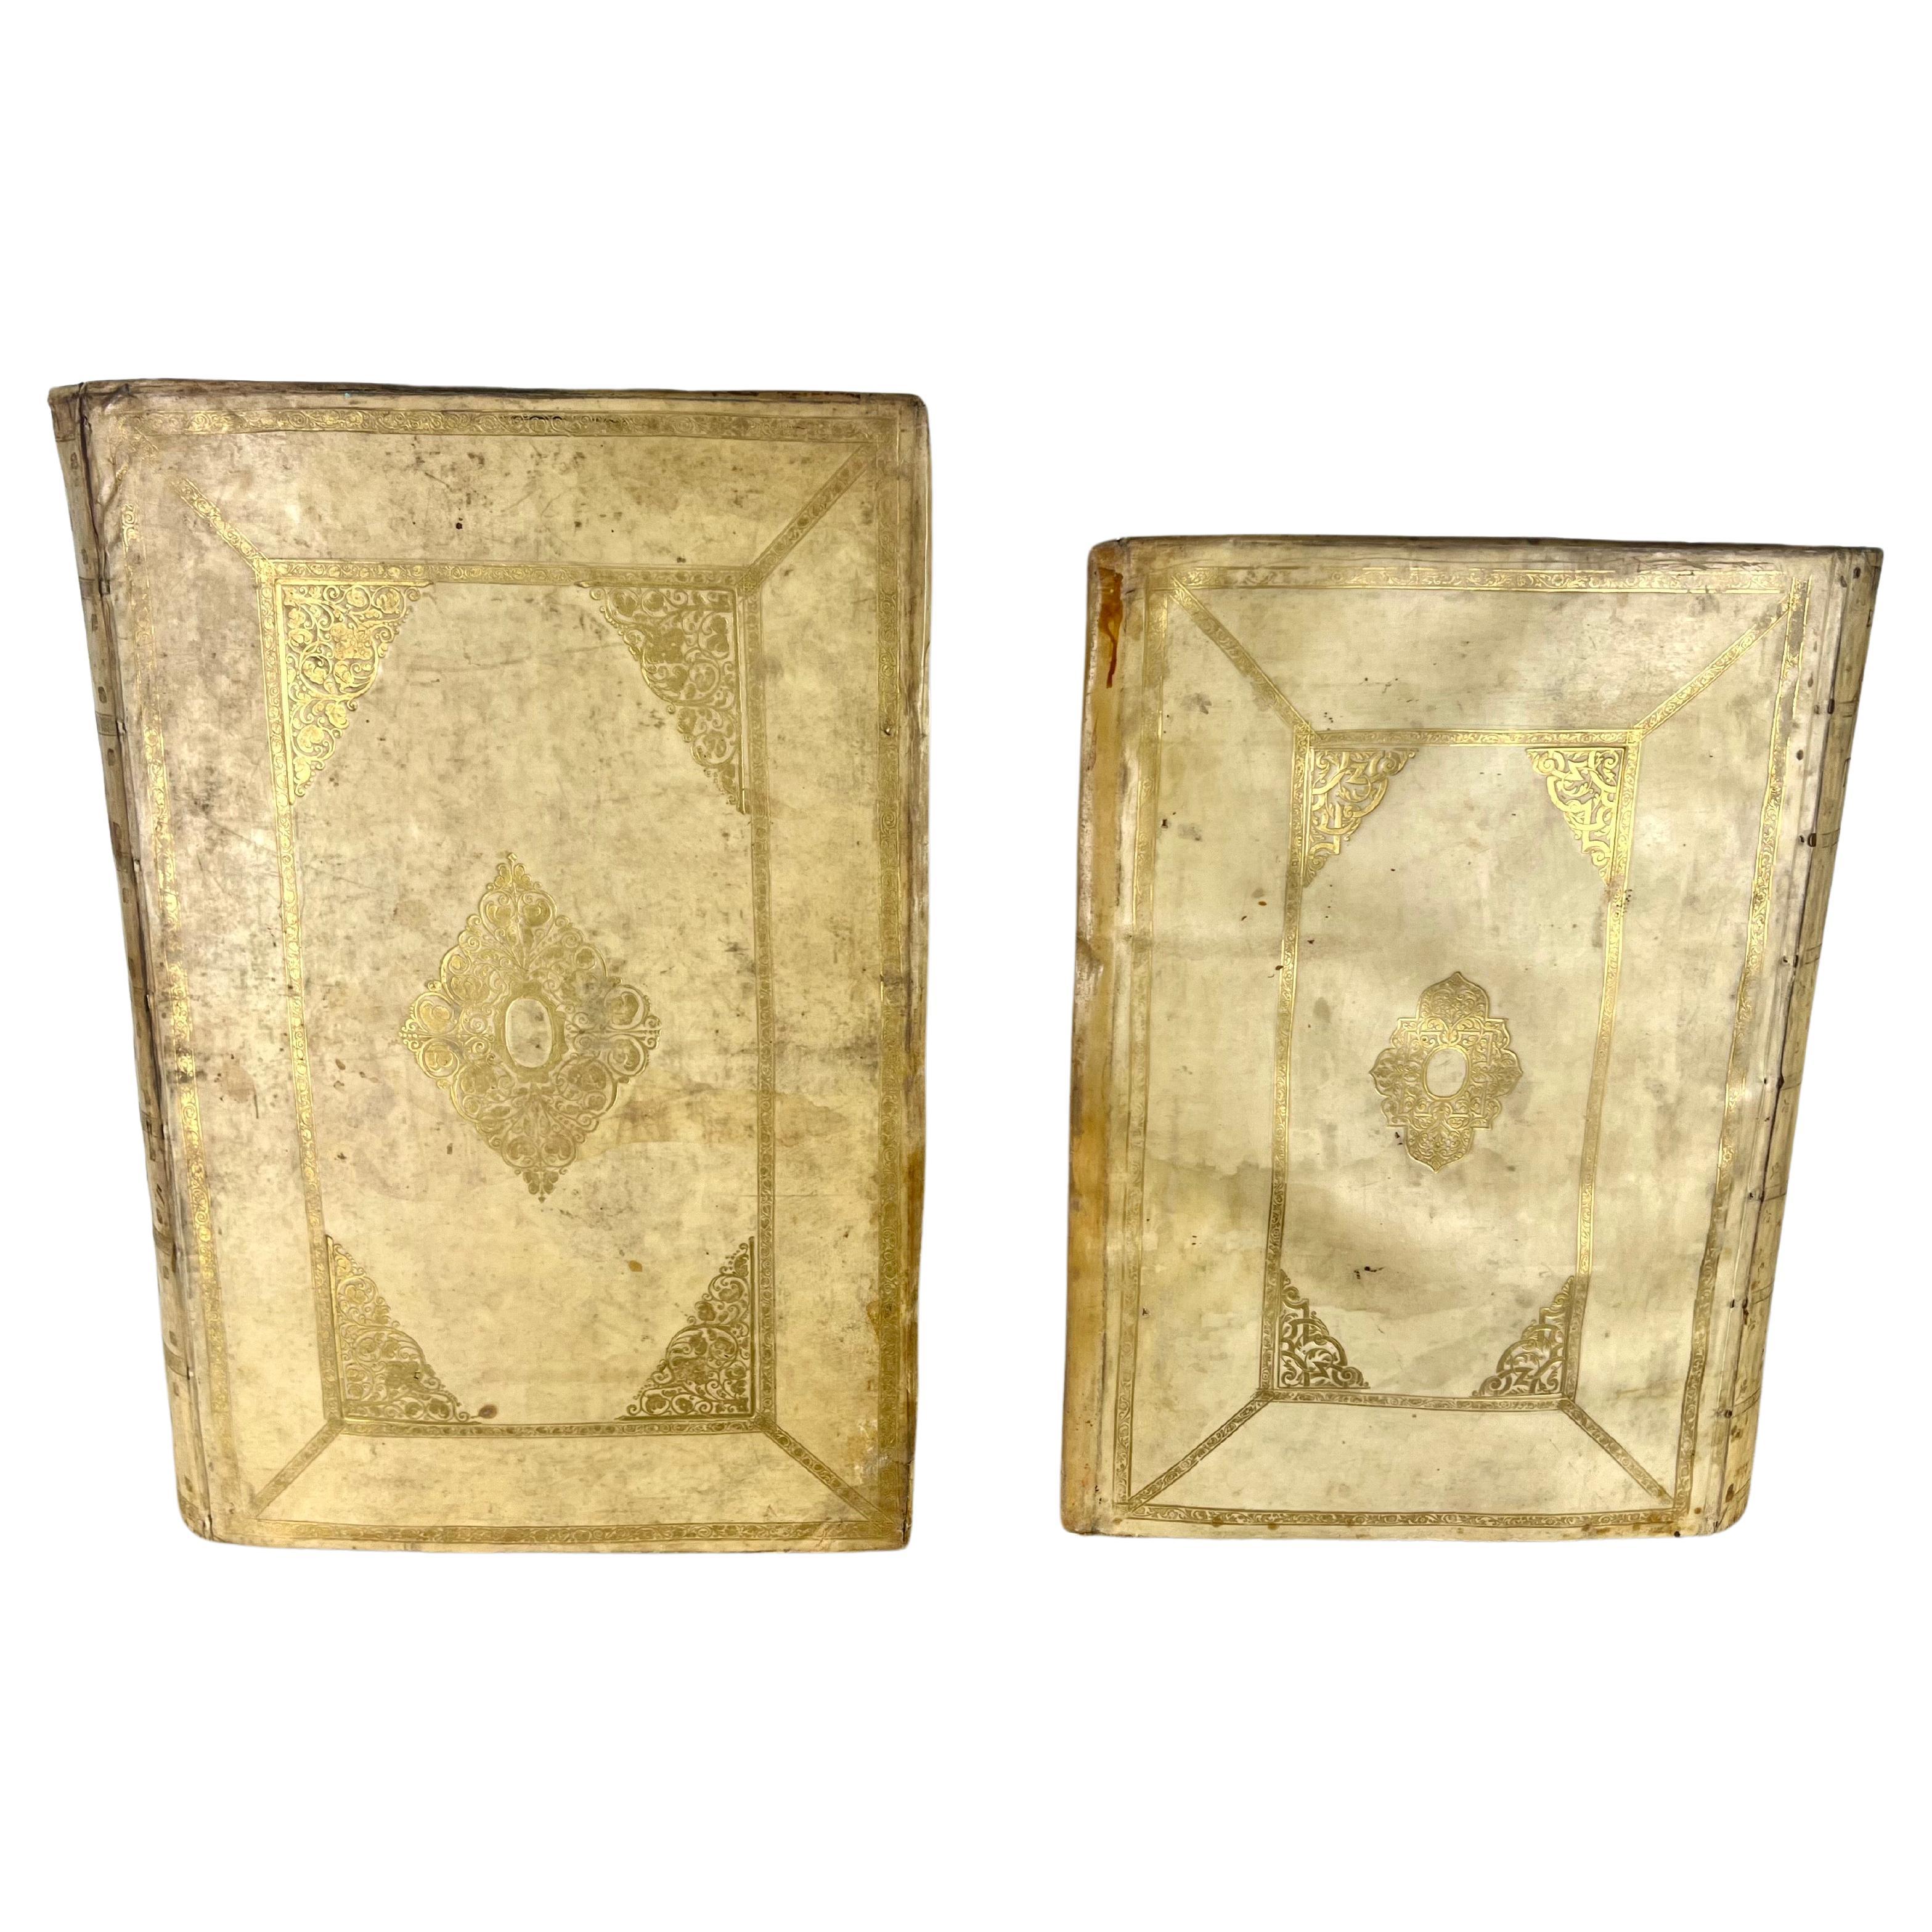 Two containers made from antique velum books. They are triangular in shape, each adorned with a faded golden design against a lighter background.  The diamond-shaped central motif, bordered by intricate patterns, suggests a touch of elegance and